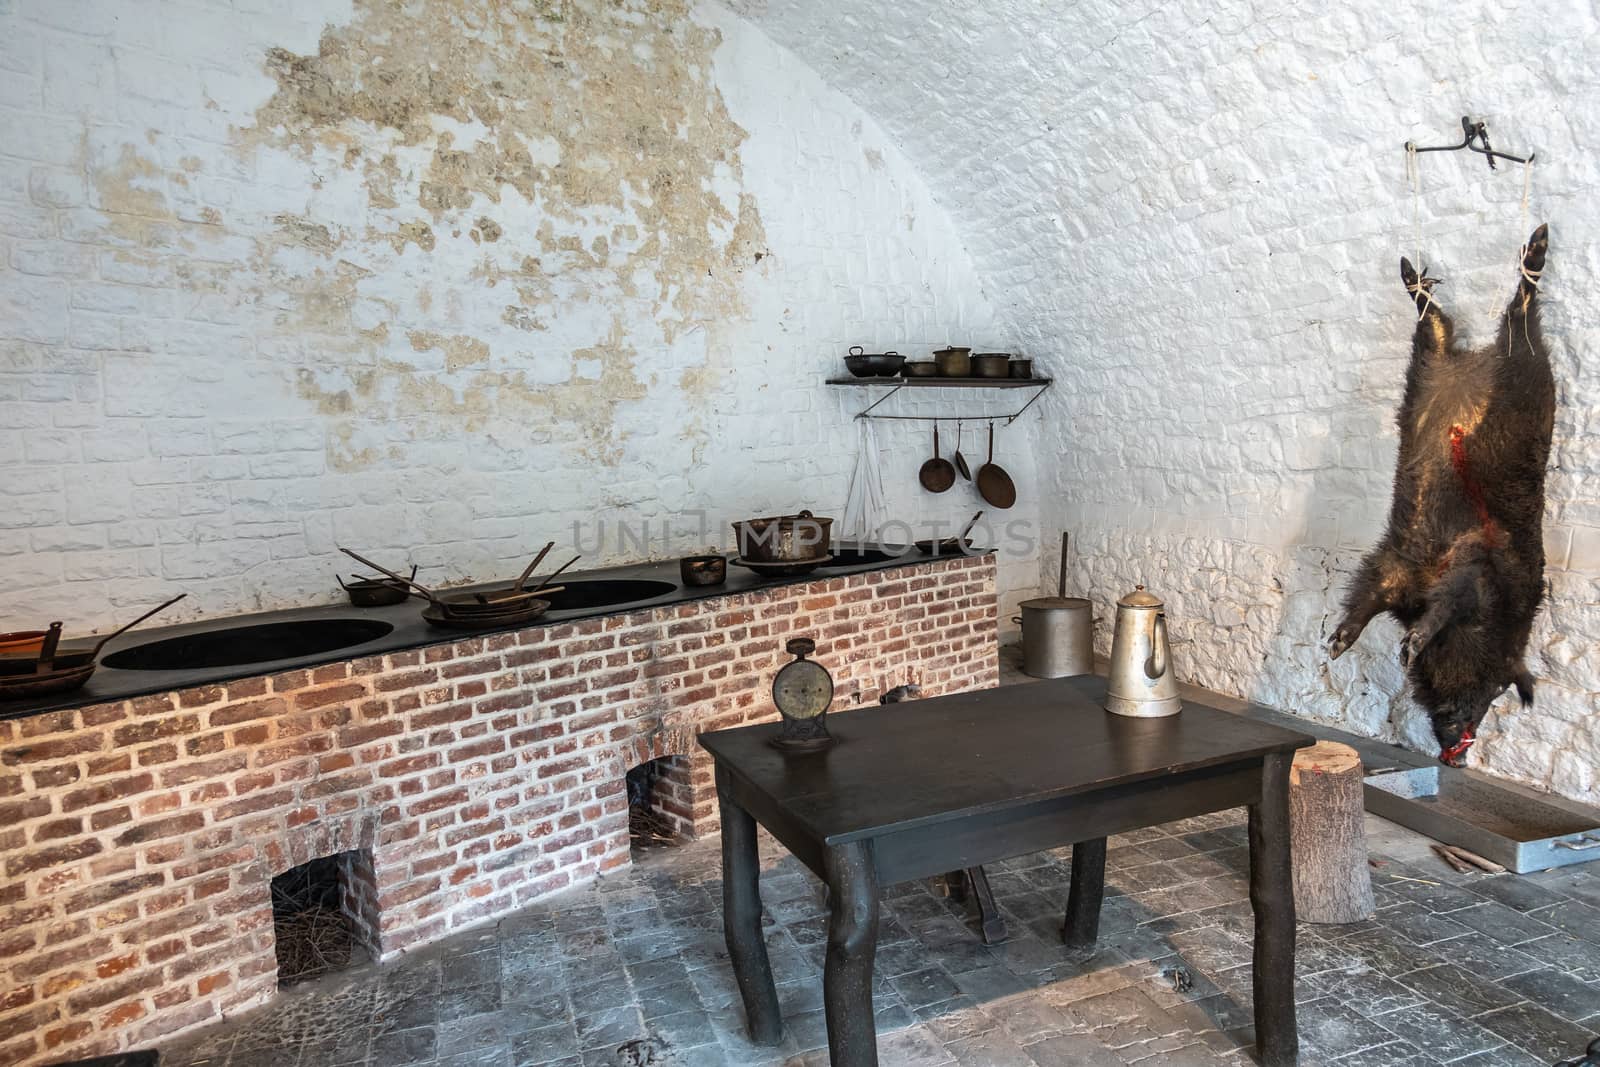 Dinant, Belgium - June 26, 2019: Inside Citadelle. Part of historic army kitchen with battery of stoves, pots and pans, and a killed boar hanging on the white pained wall.